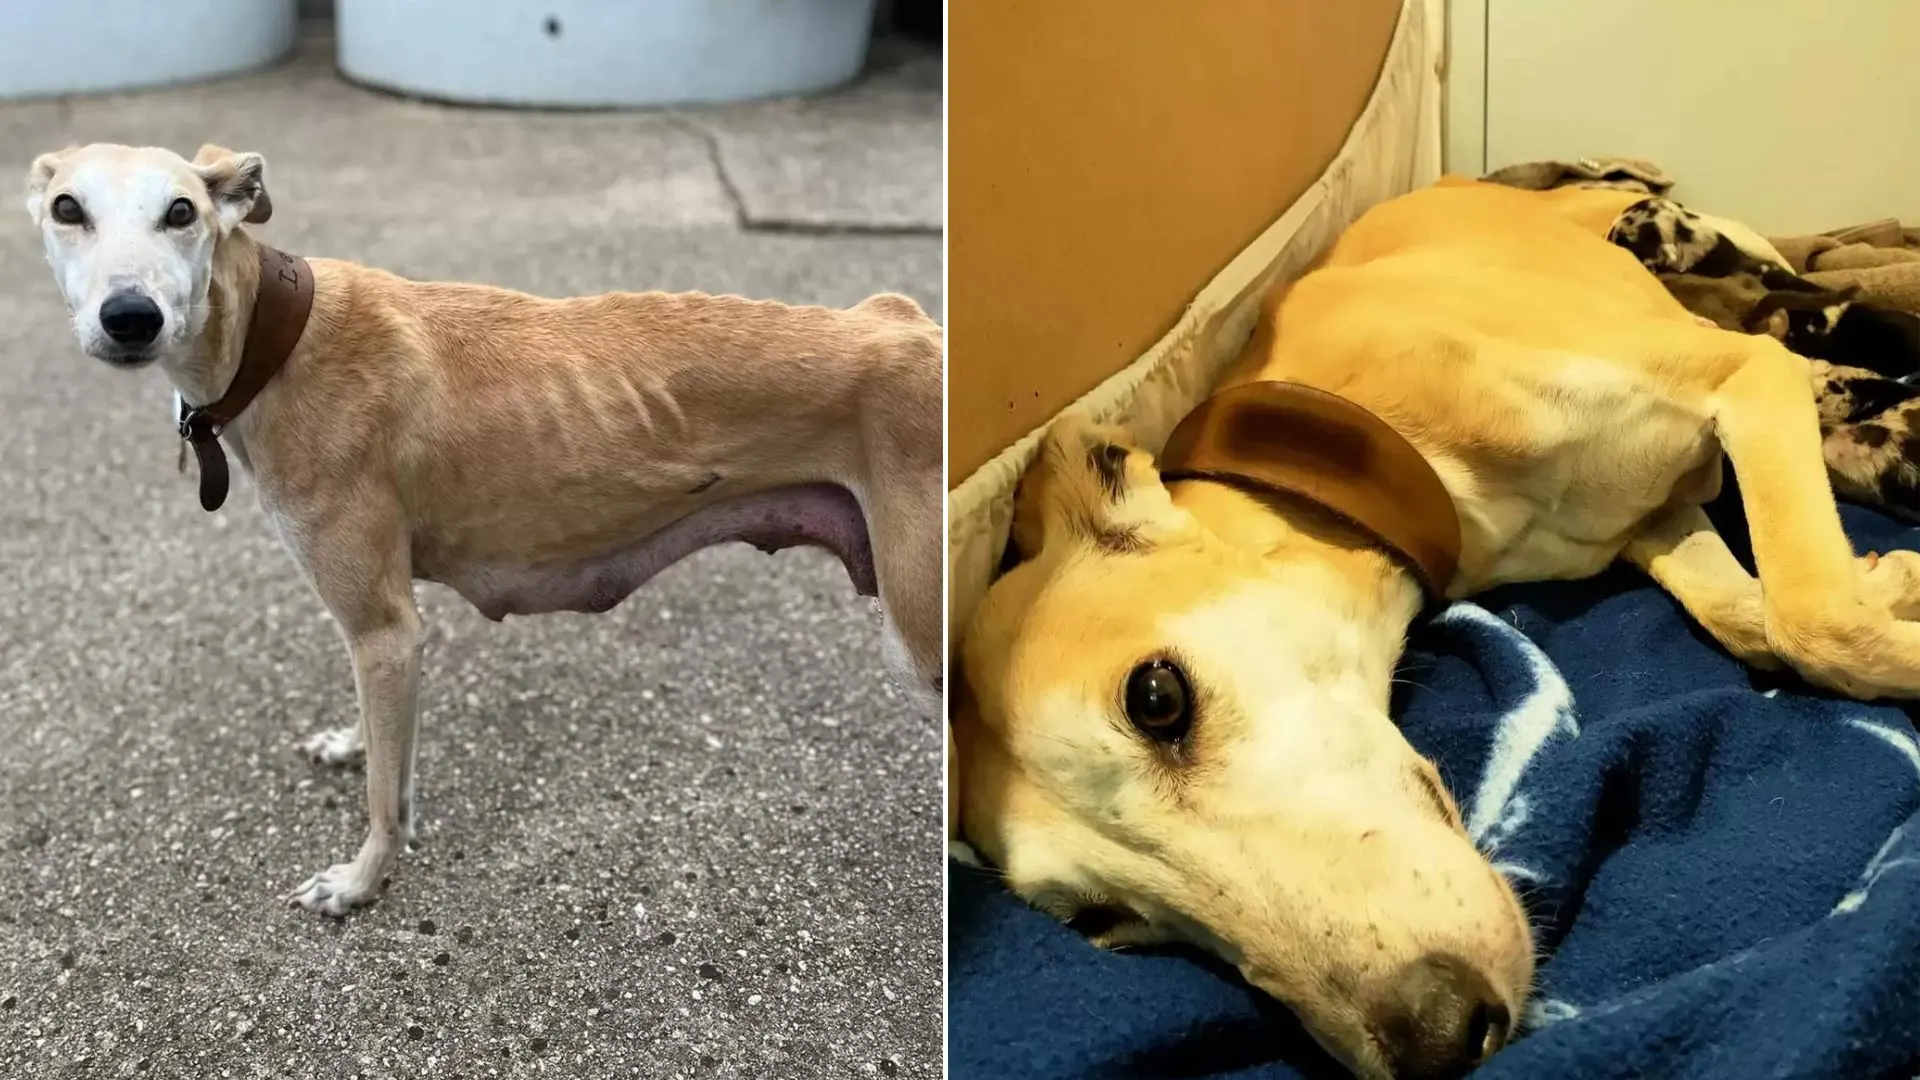 Rescuers Shocked When They Found Out Extremely Skinny Dog’s Secret